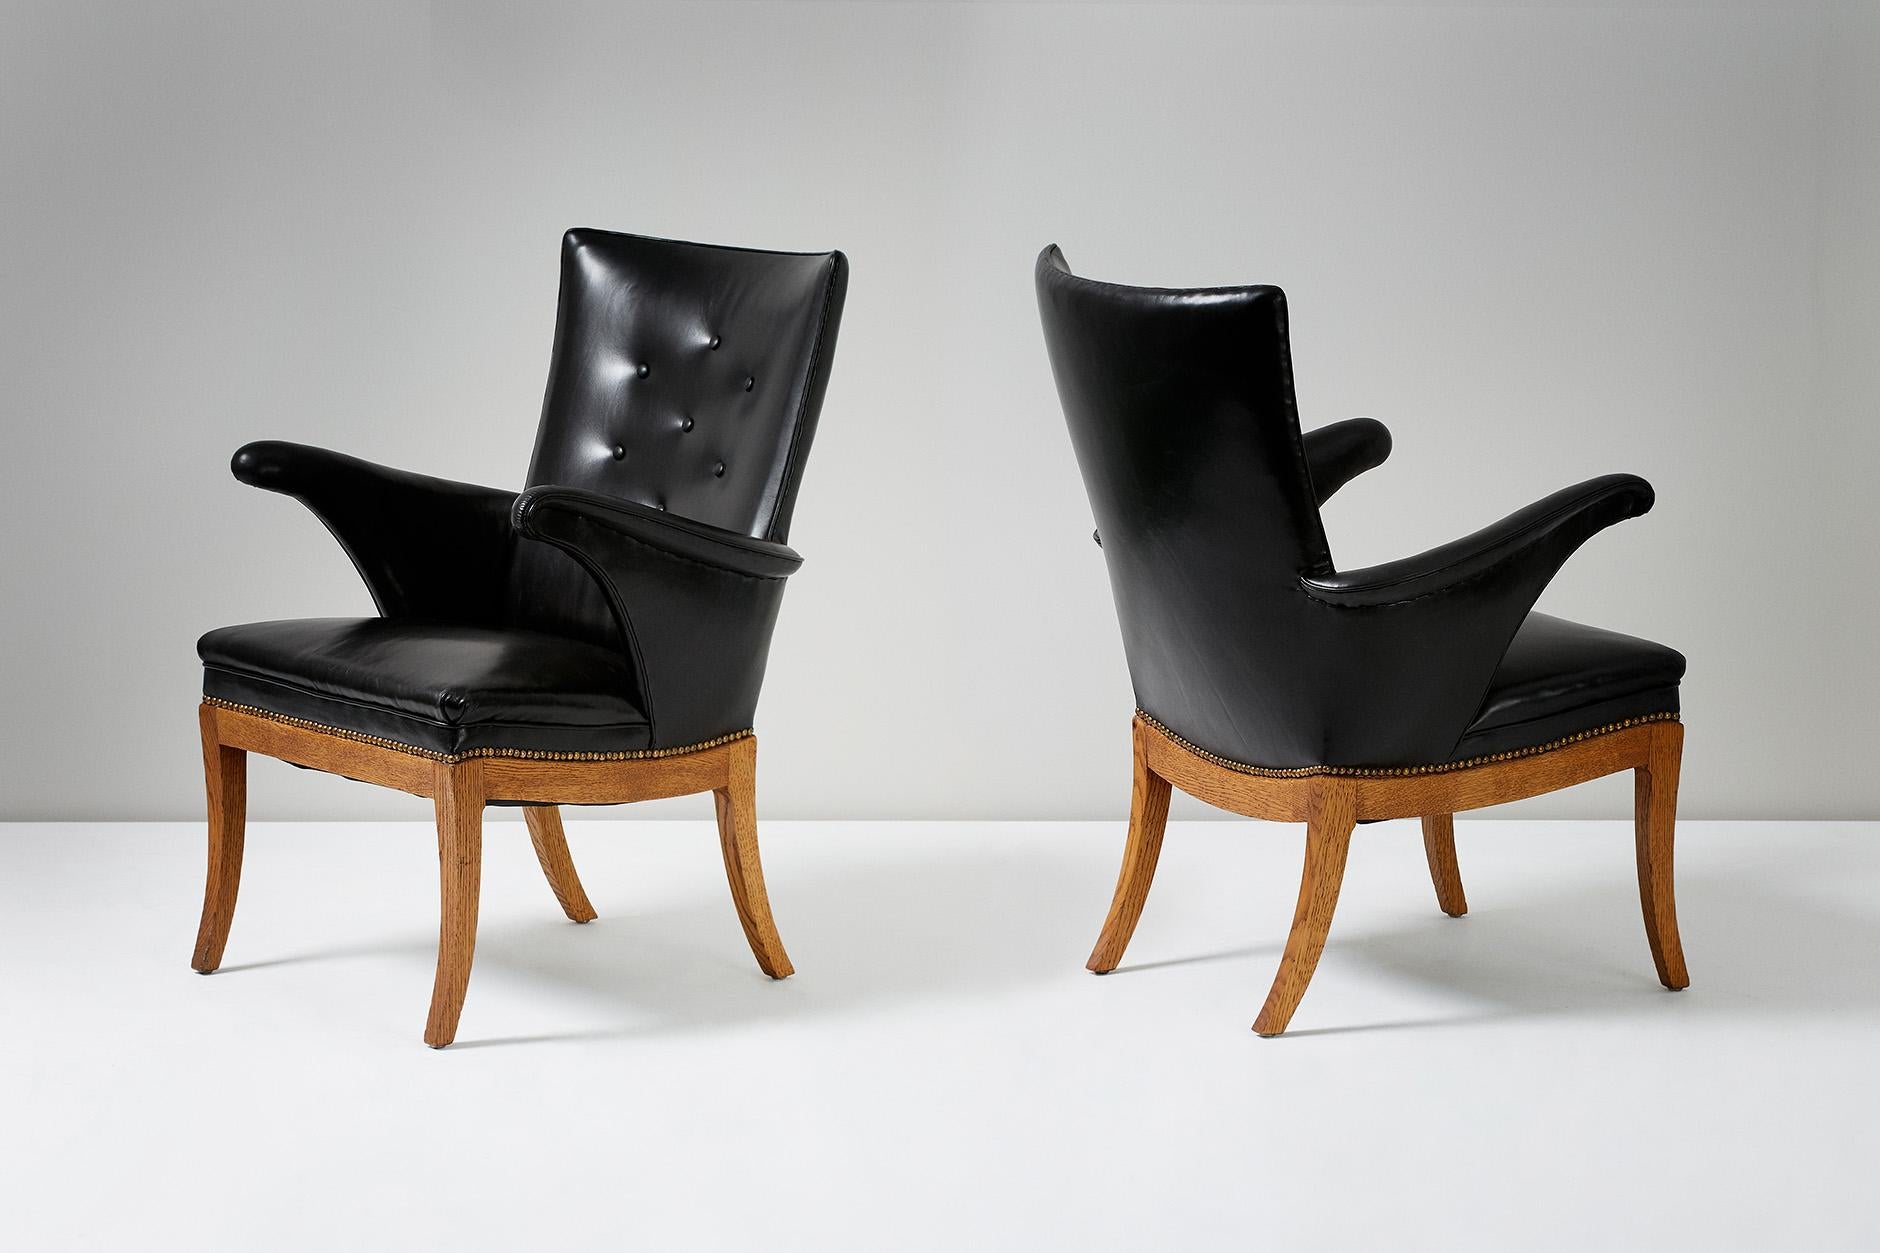 Frits Henningsen (1889 - 1965)

Pair of armchairs, 1932

Designed and produced by master cabinet maker Frits Henningsen in Denmark, circa 1932. Patinated oak base, seats upholstered in black leather and fitted with brass nails. 

Henningsen,